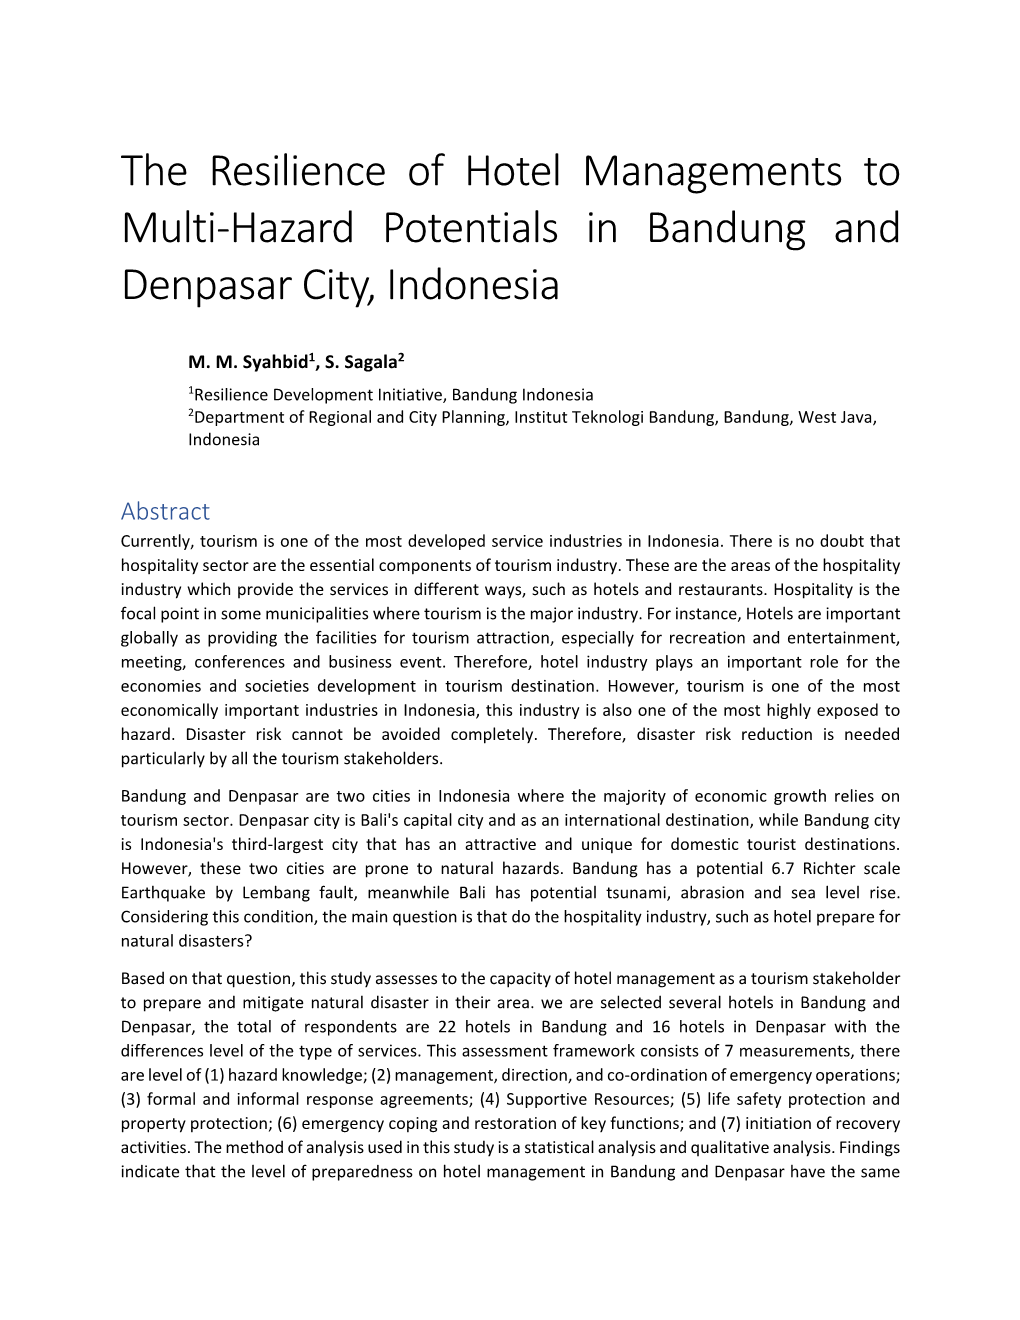 The Resilience of Hotel Managements to Multi‐Hazard Potentials in Bandung and Denpasar City, Indonesia